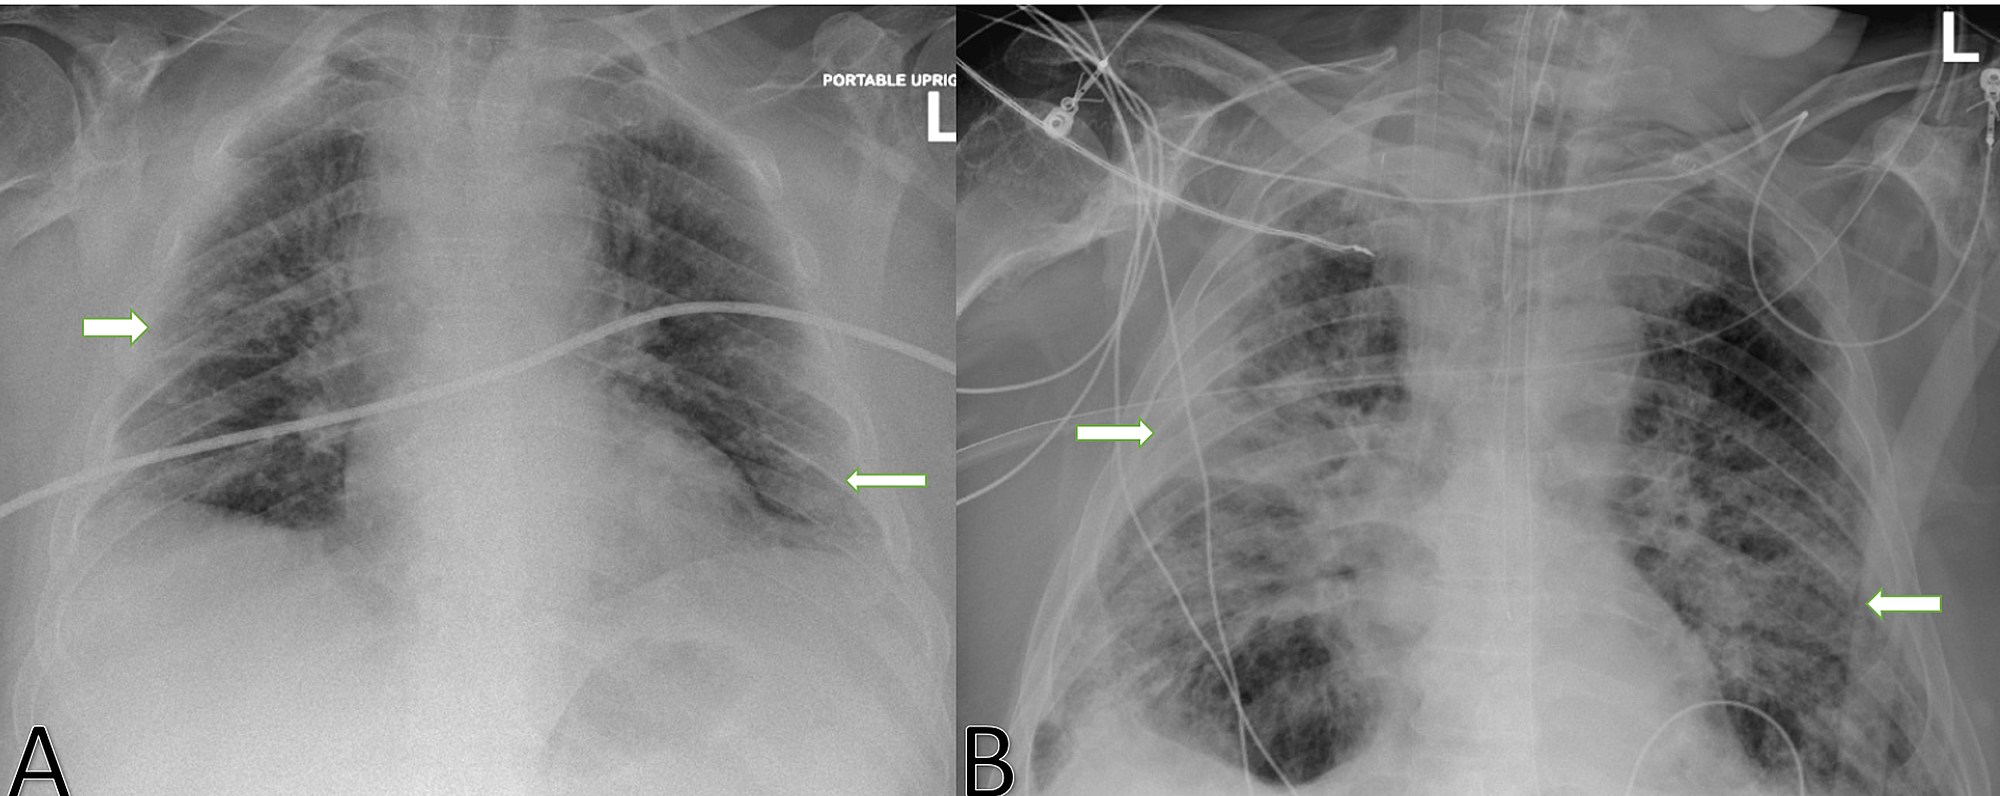 Aspergillosis Chest X Ray